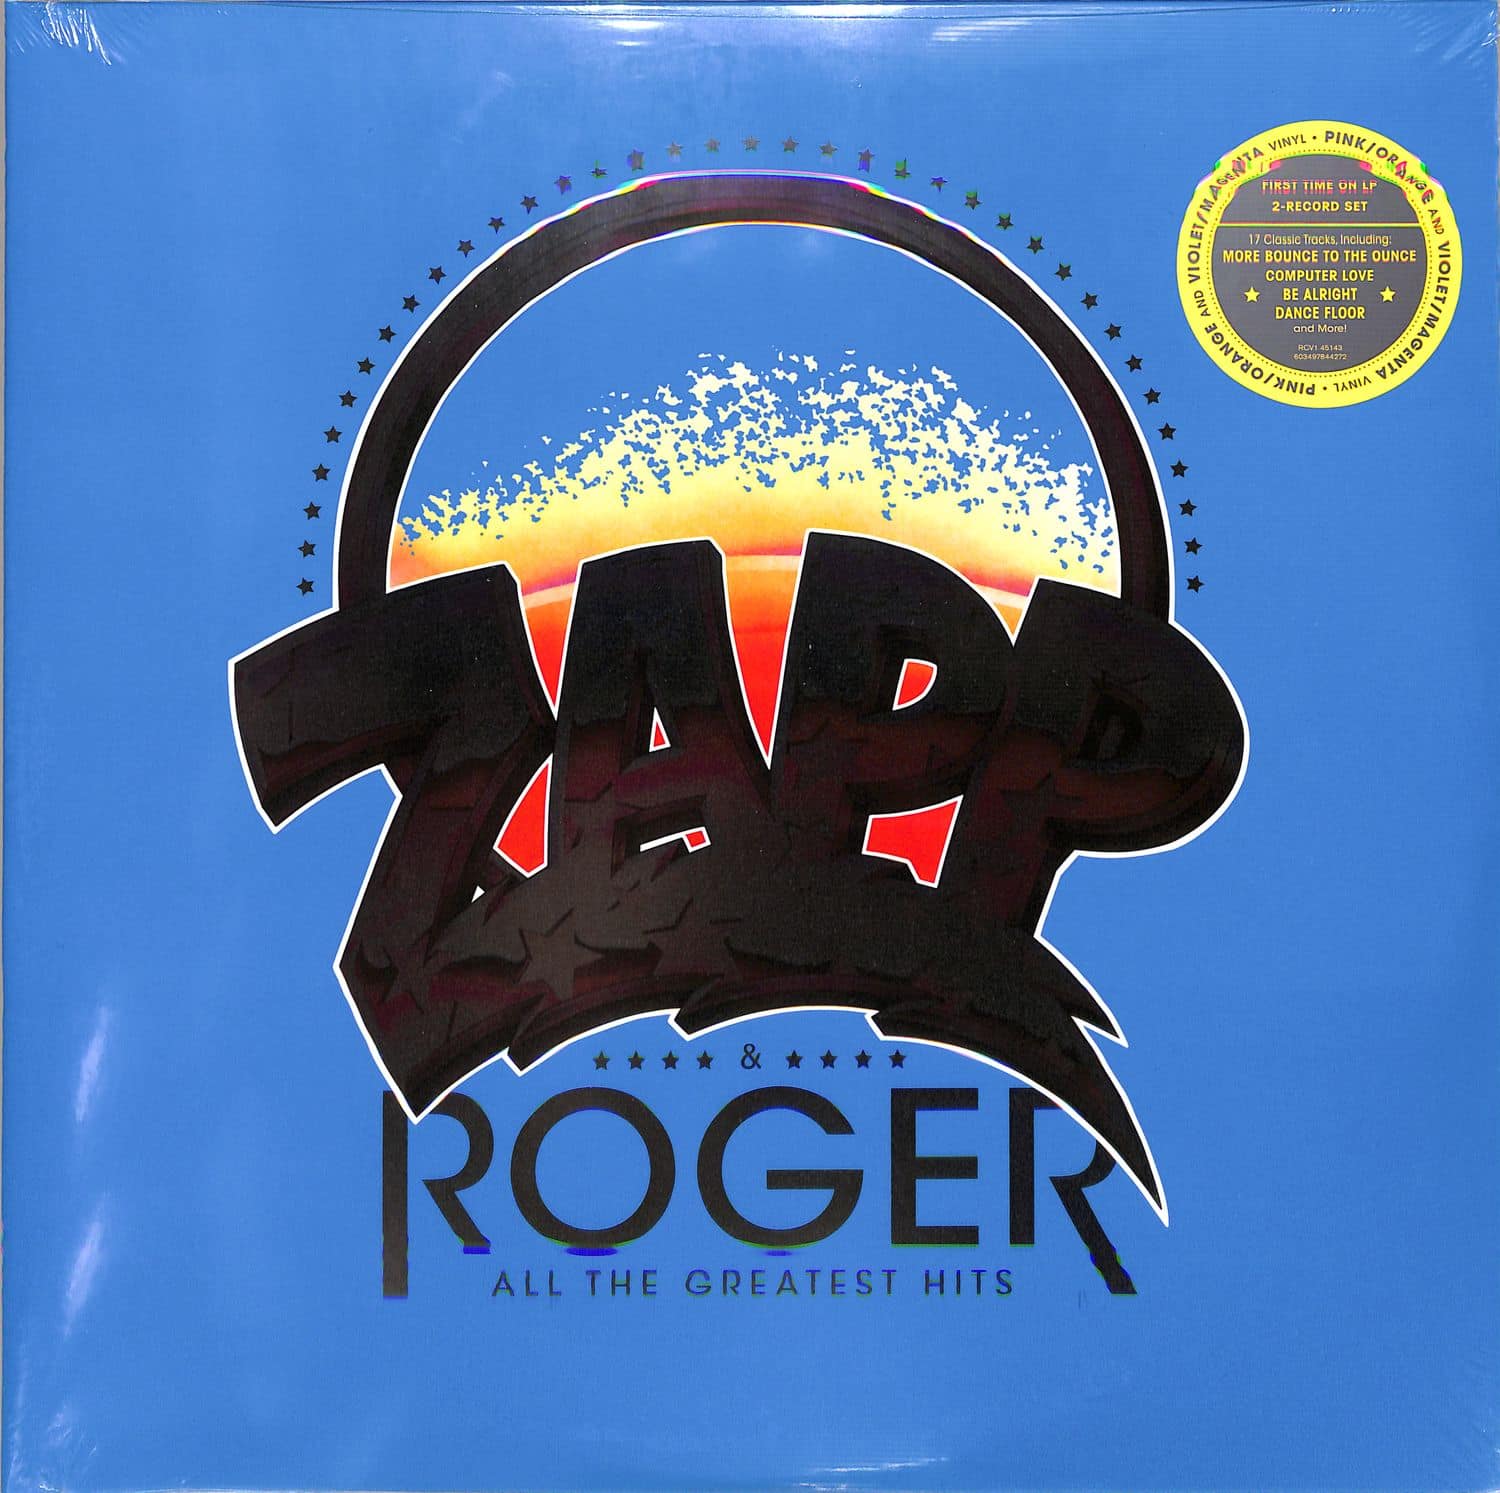 Zapp  Roger - ALL THE GREATEST HITS